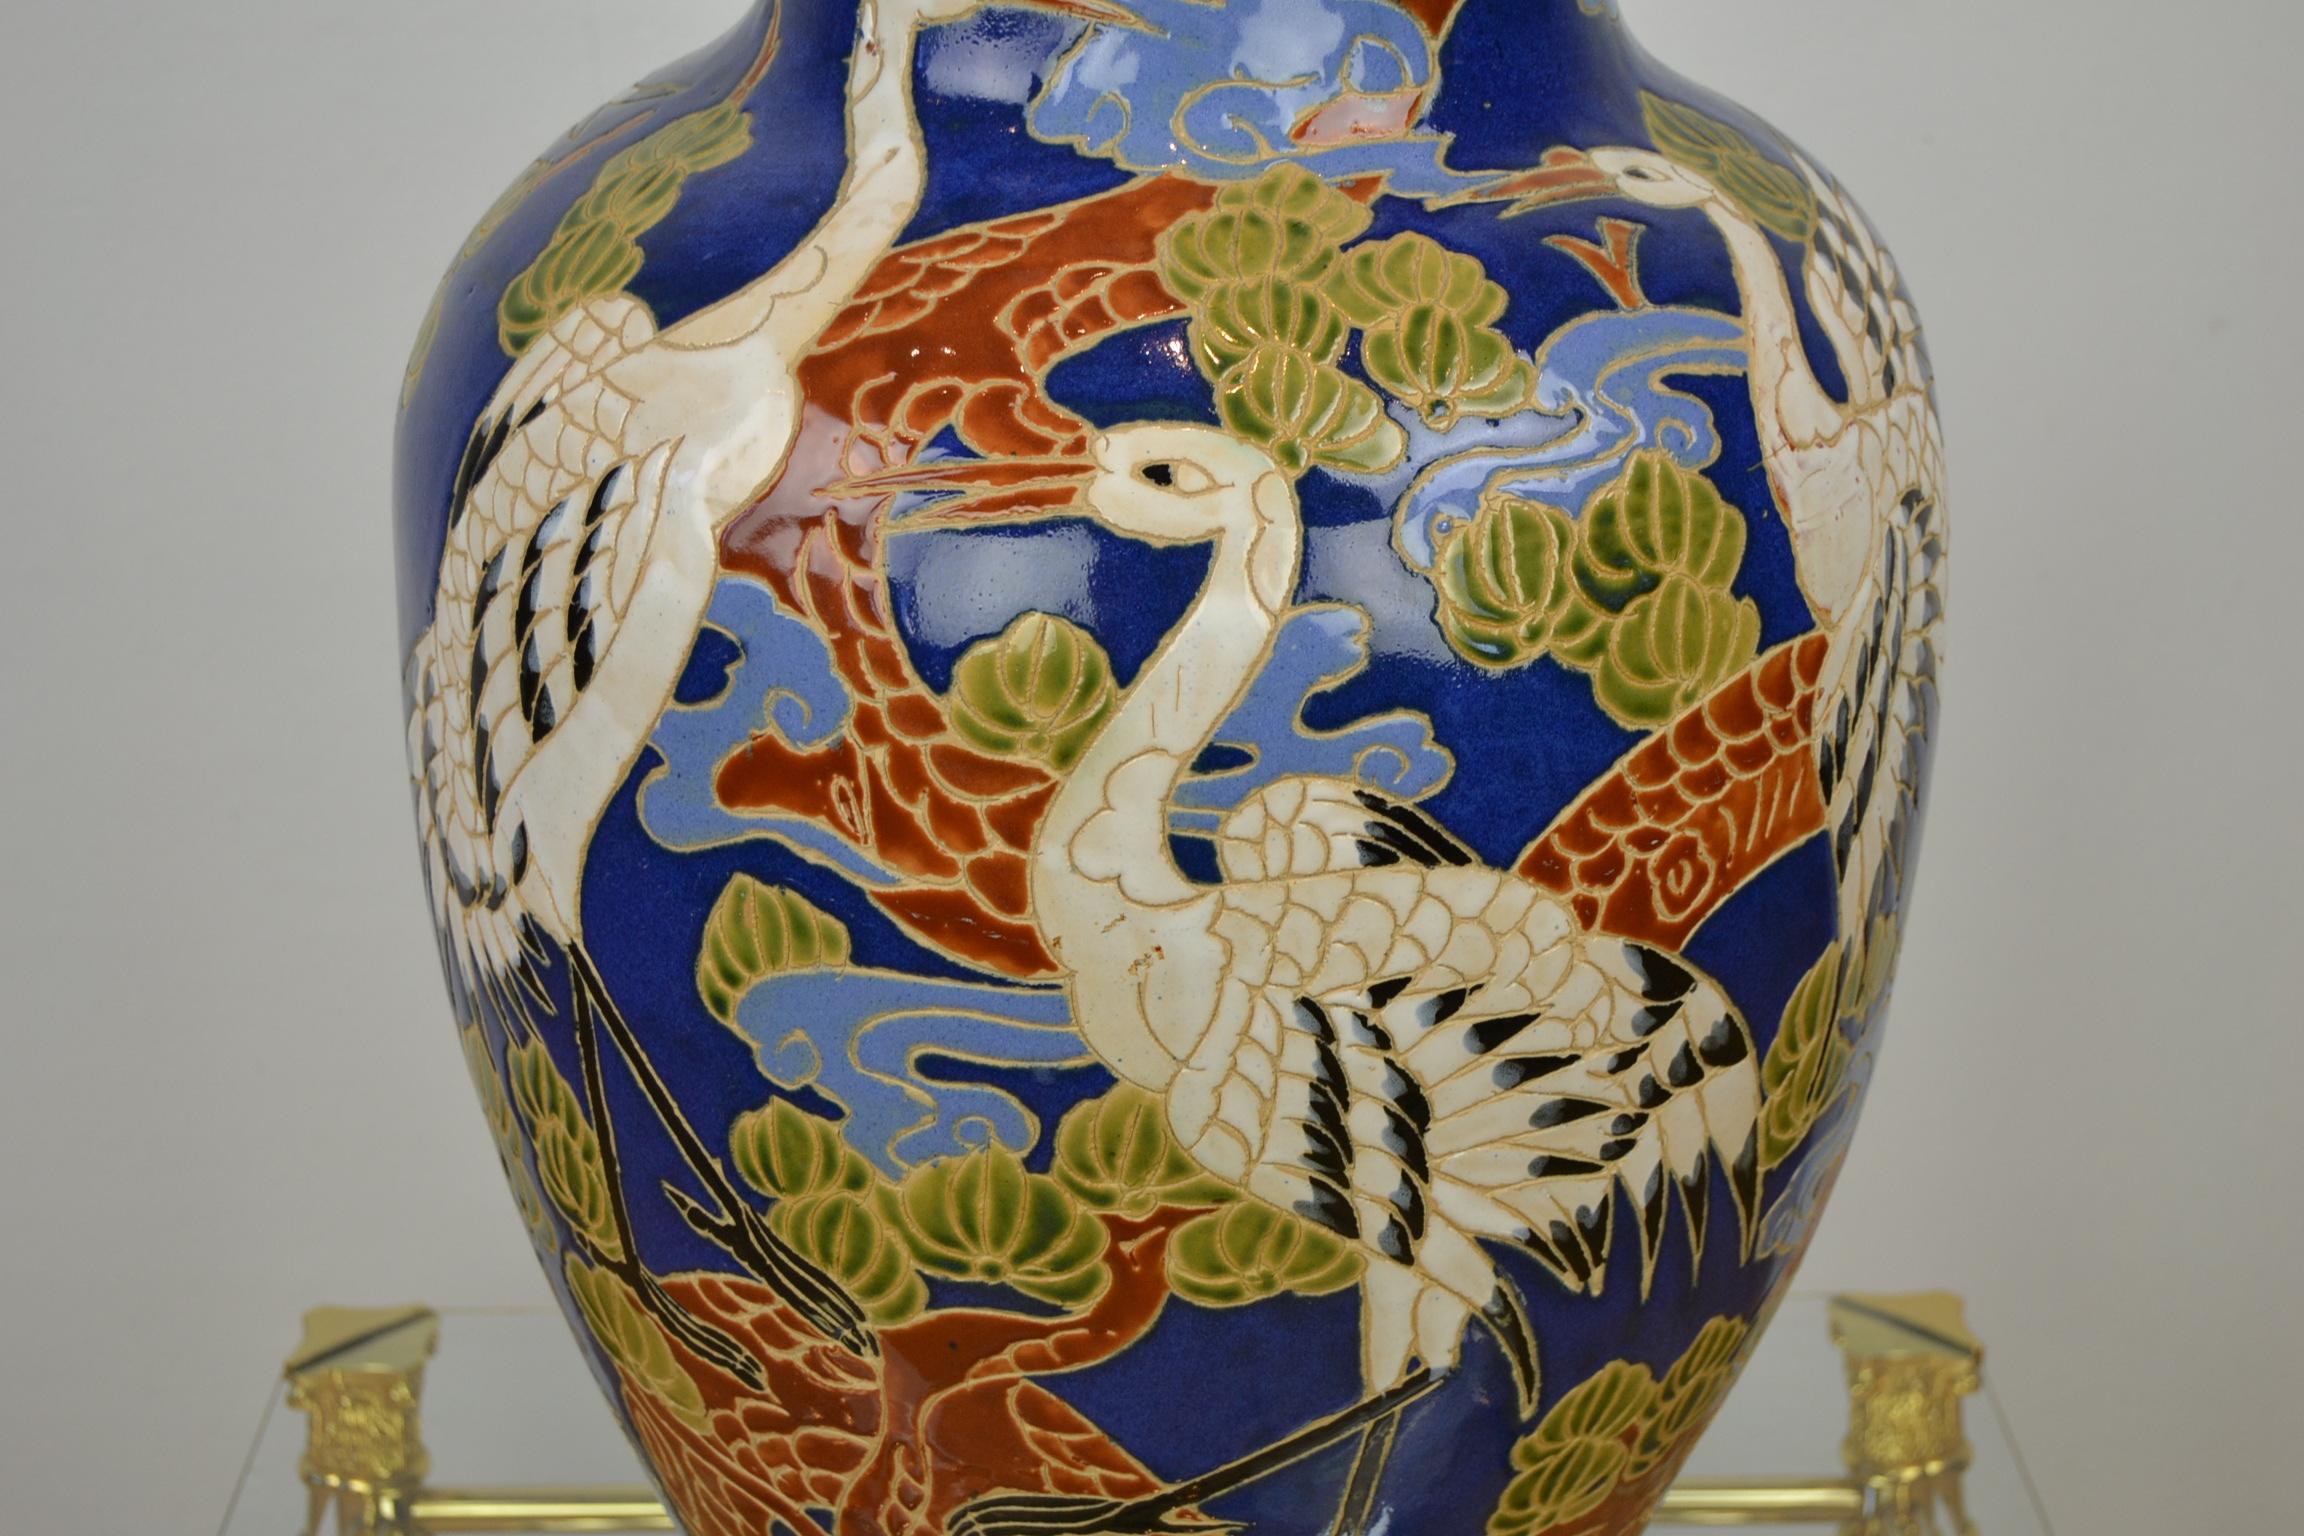 Unknown Large Blue Ceramic Vase with White Cranes